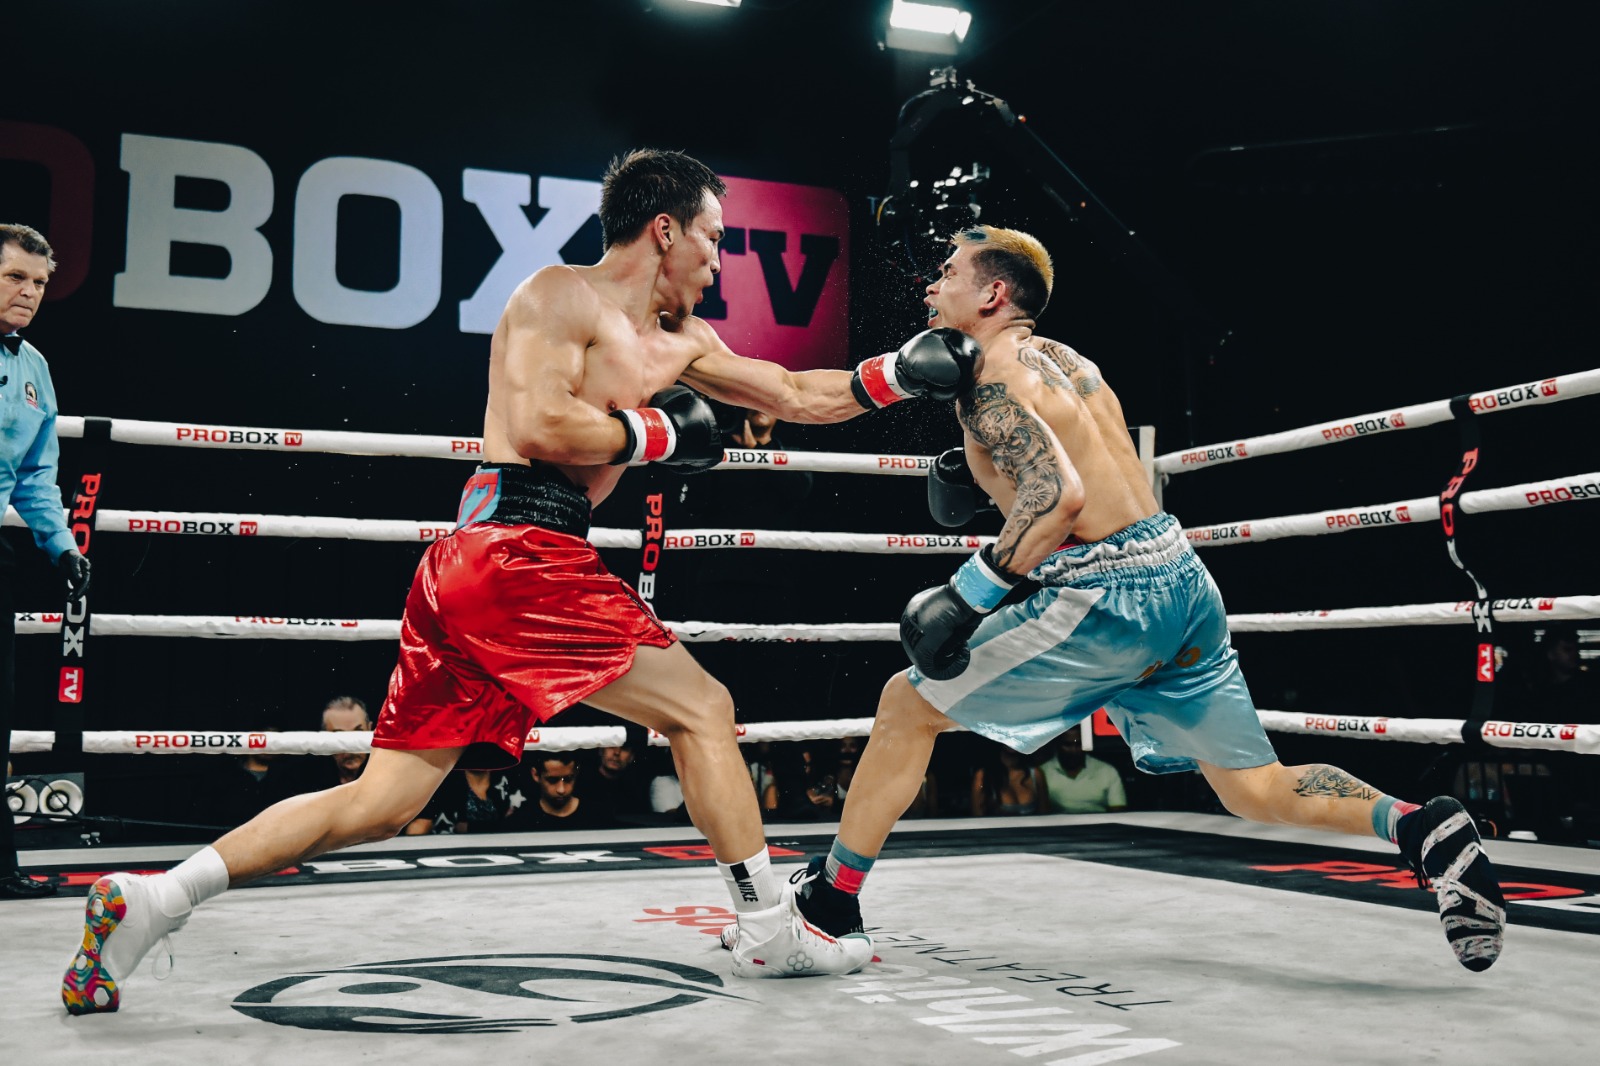 Batyrzhan Jukembayev gets a shot at redemption against Mohamed Mimoune on Wed.